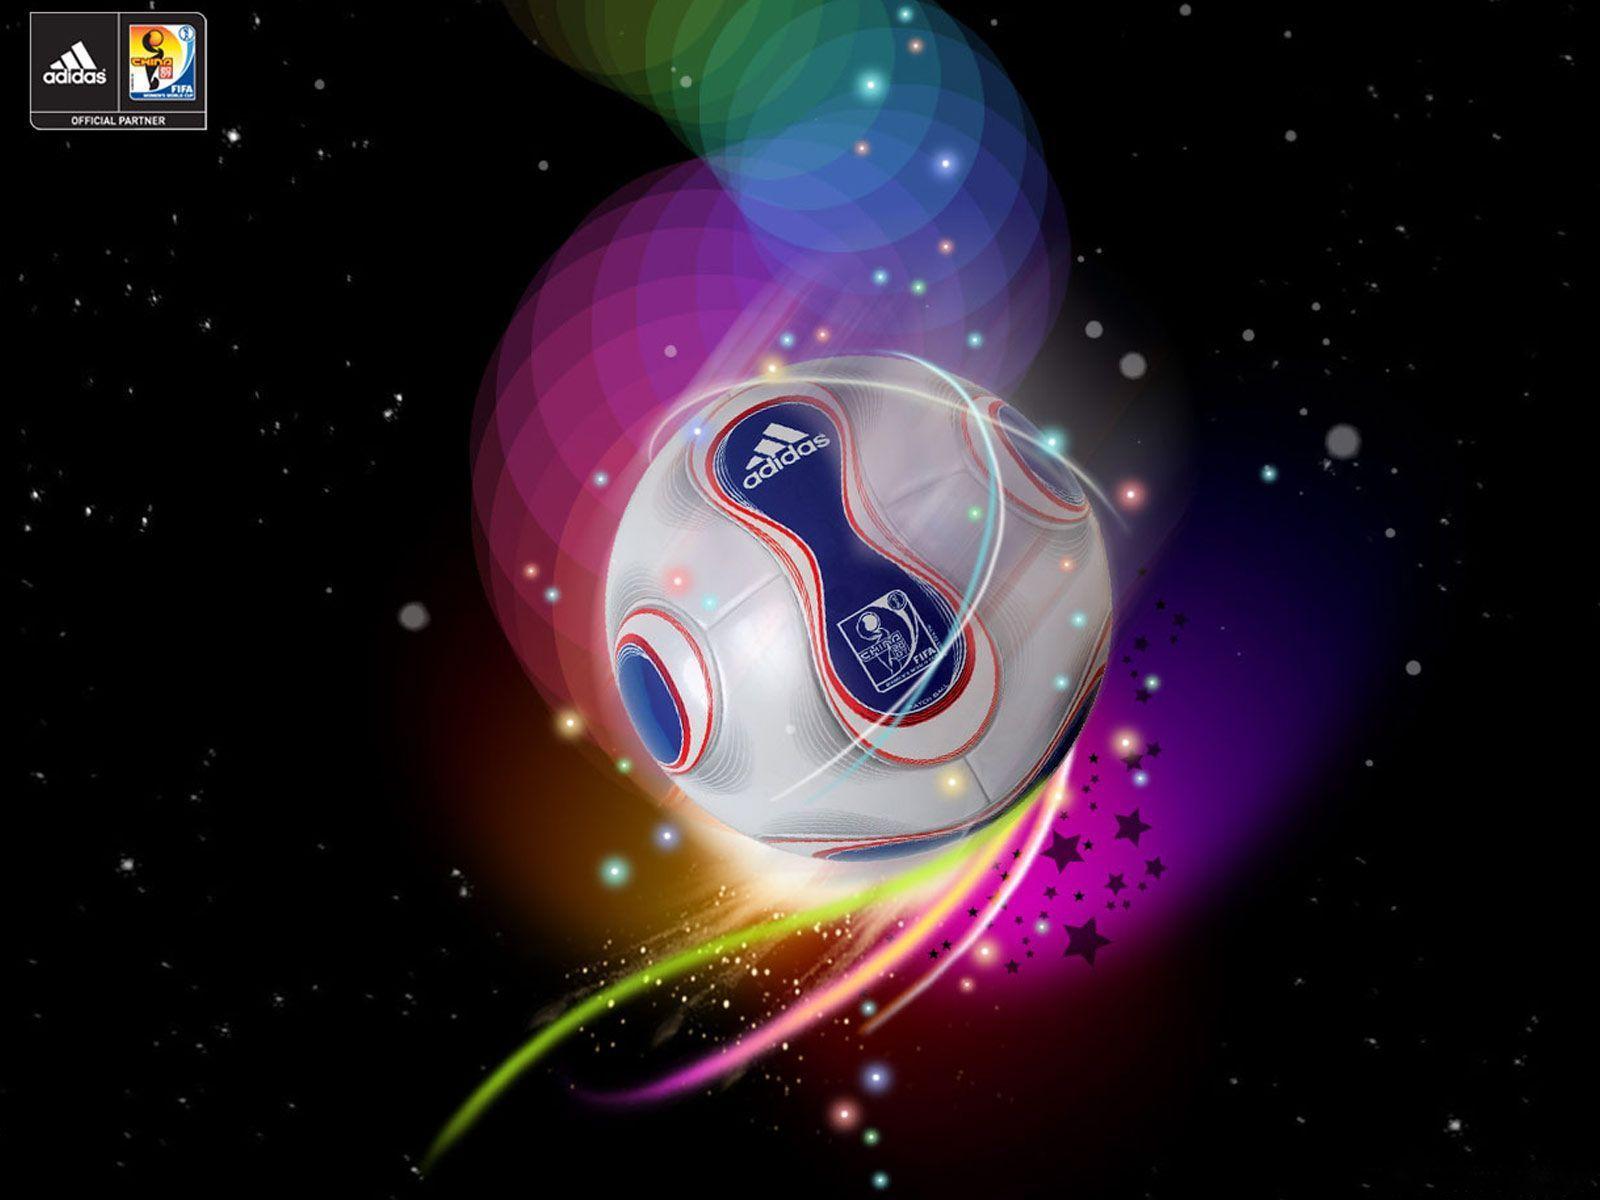 Awesome Soccer Wallpaper Image & Picture